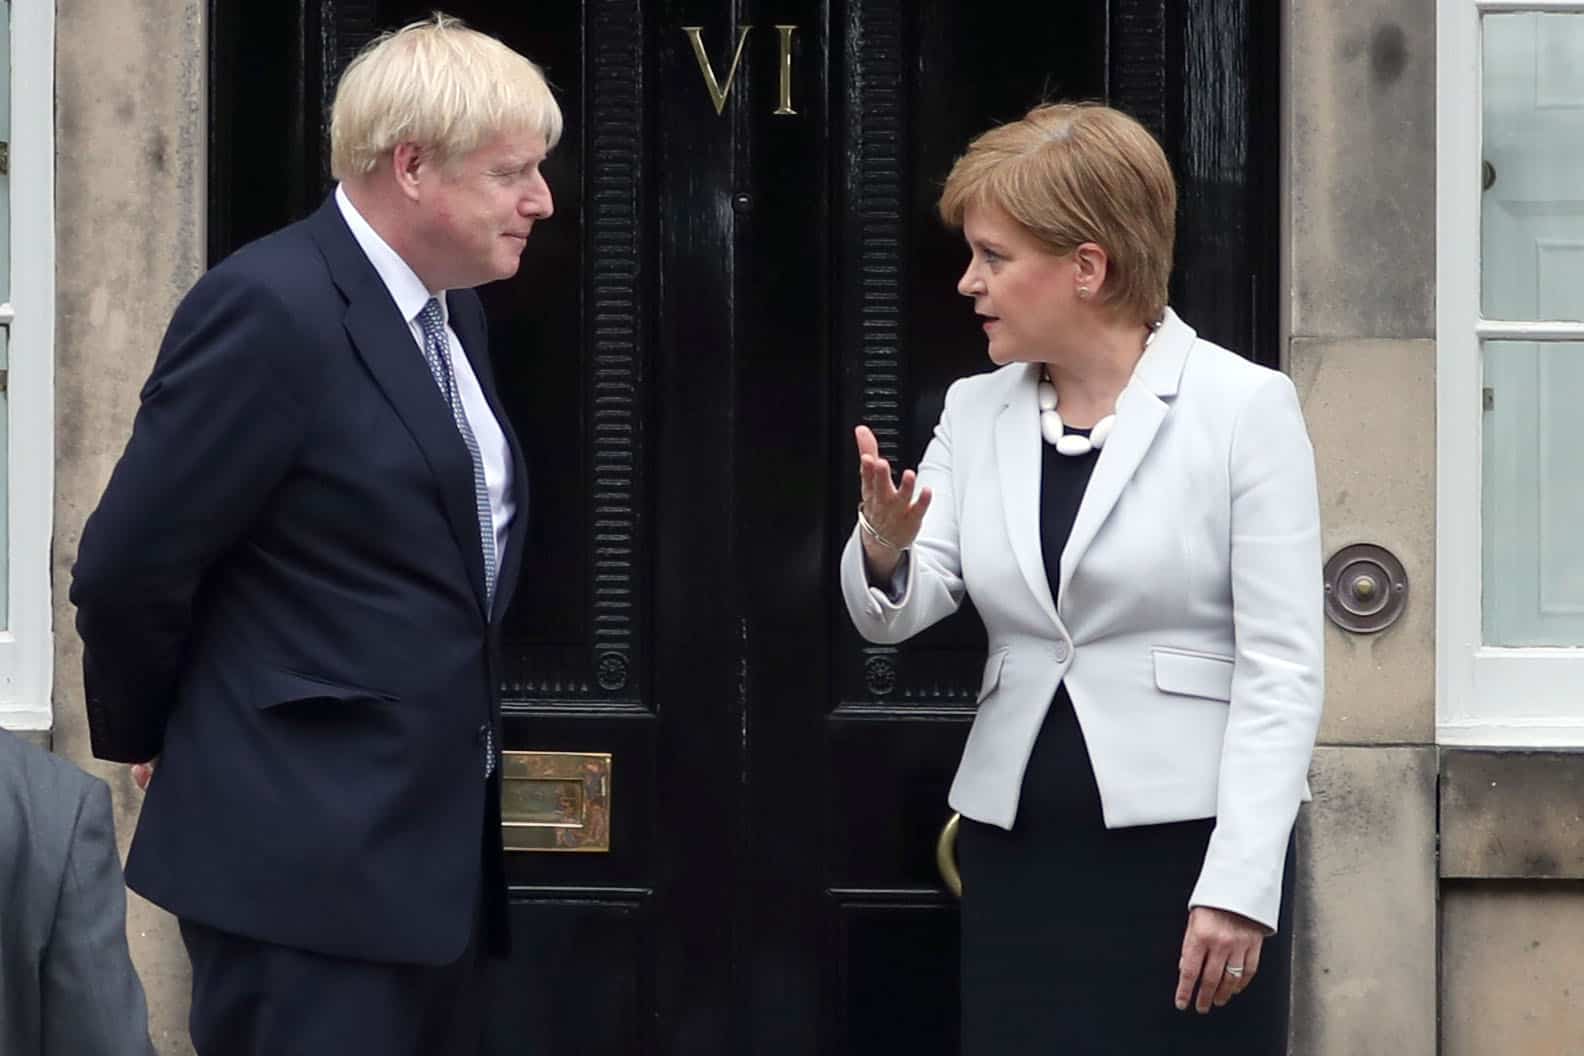 Top Tory joins Sturgeon’s call to extend Brexit transition over Covid chaos